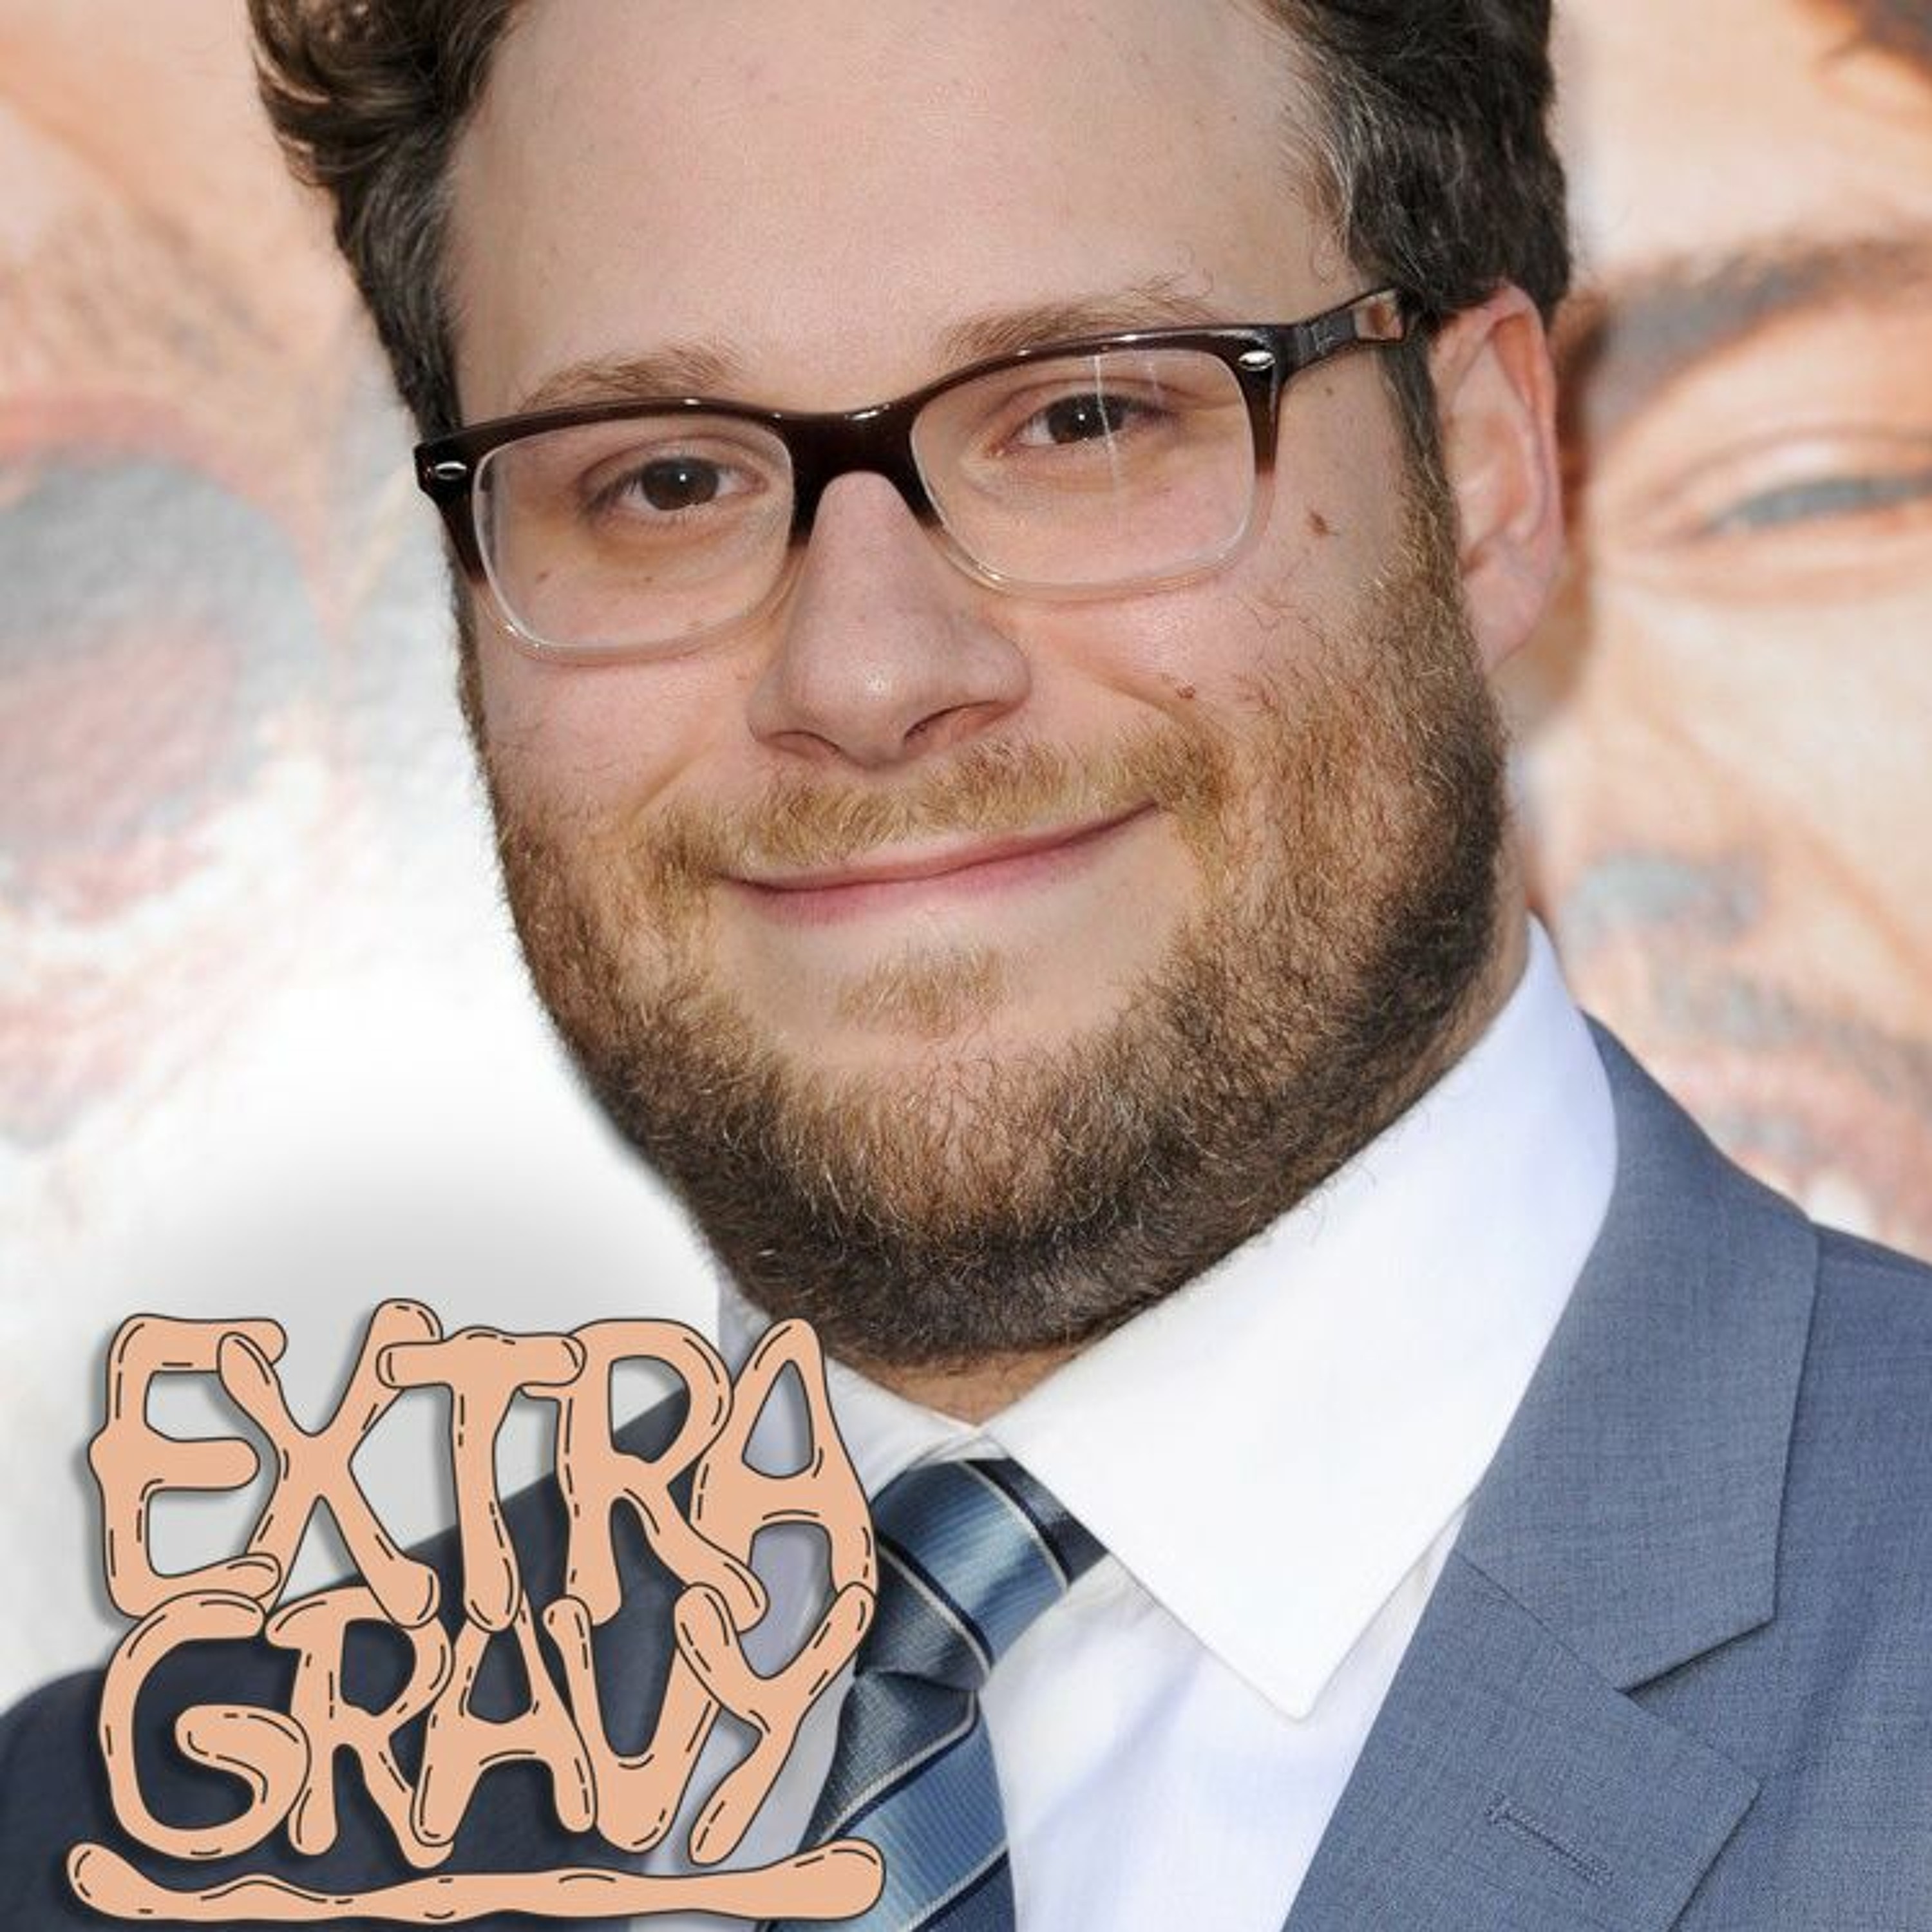 Thumbnail for "The Real Seth Rogen ft. Keddy".